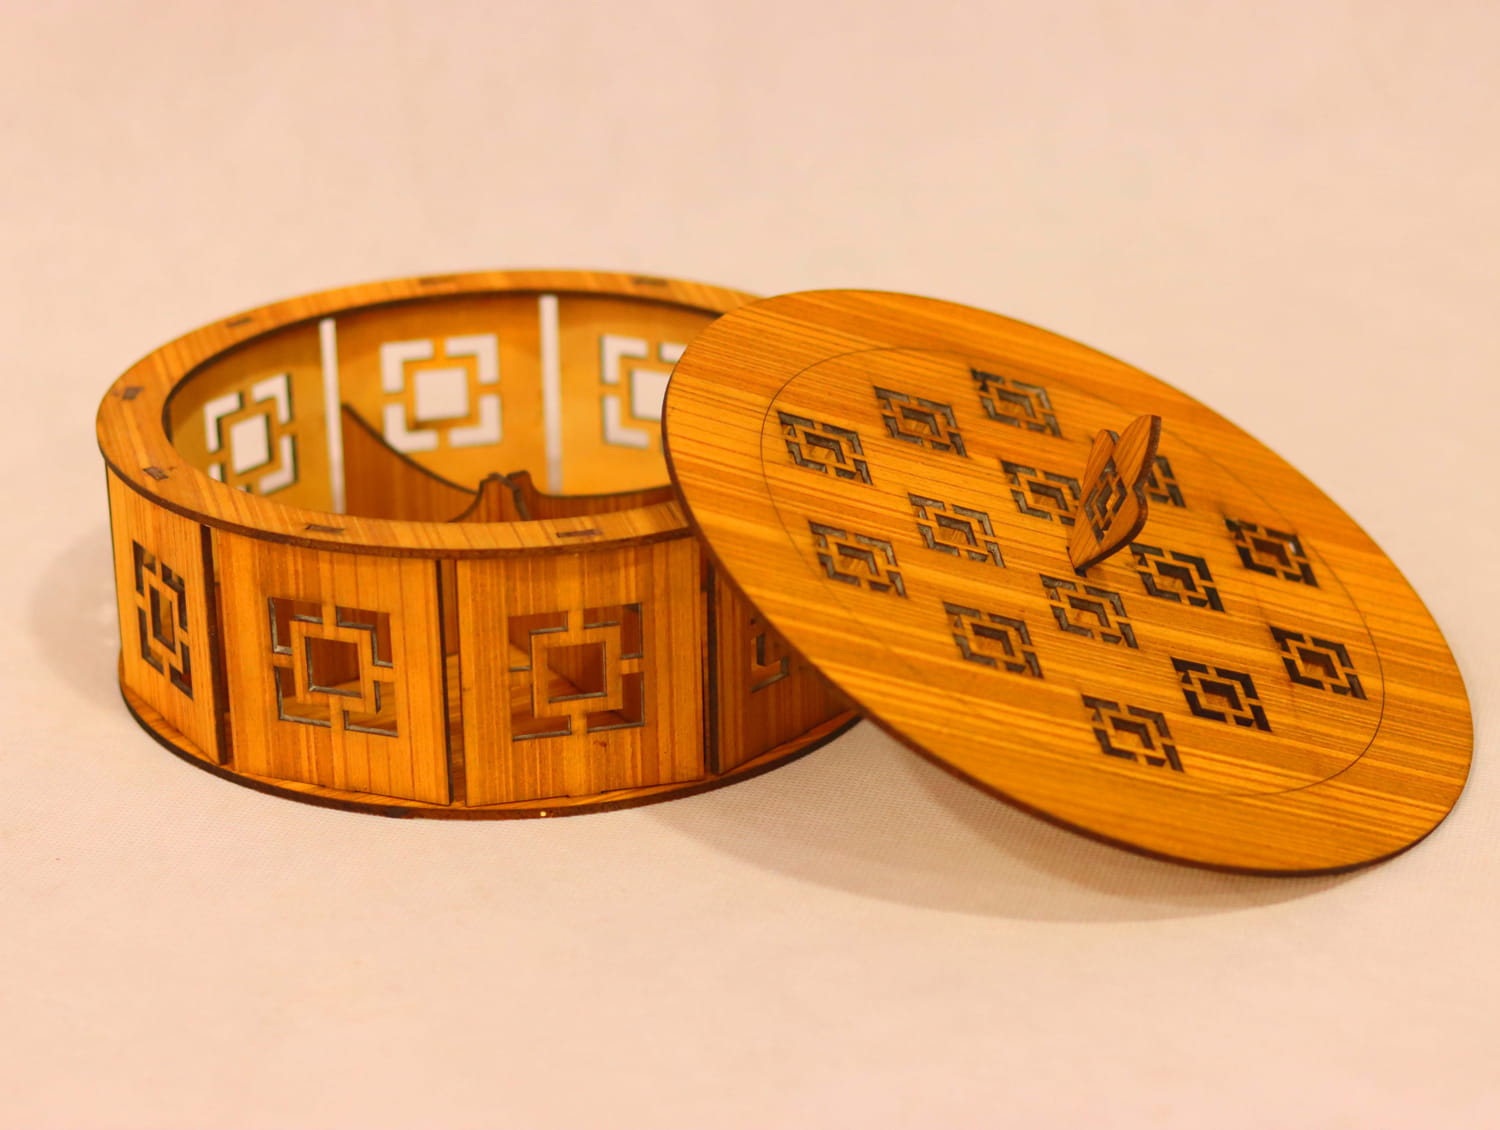 Laser Cut Round Compartment Box With Lid 3mm Free Vector